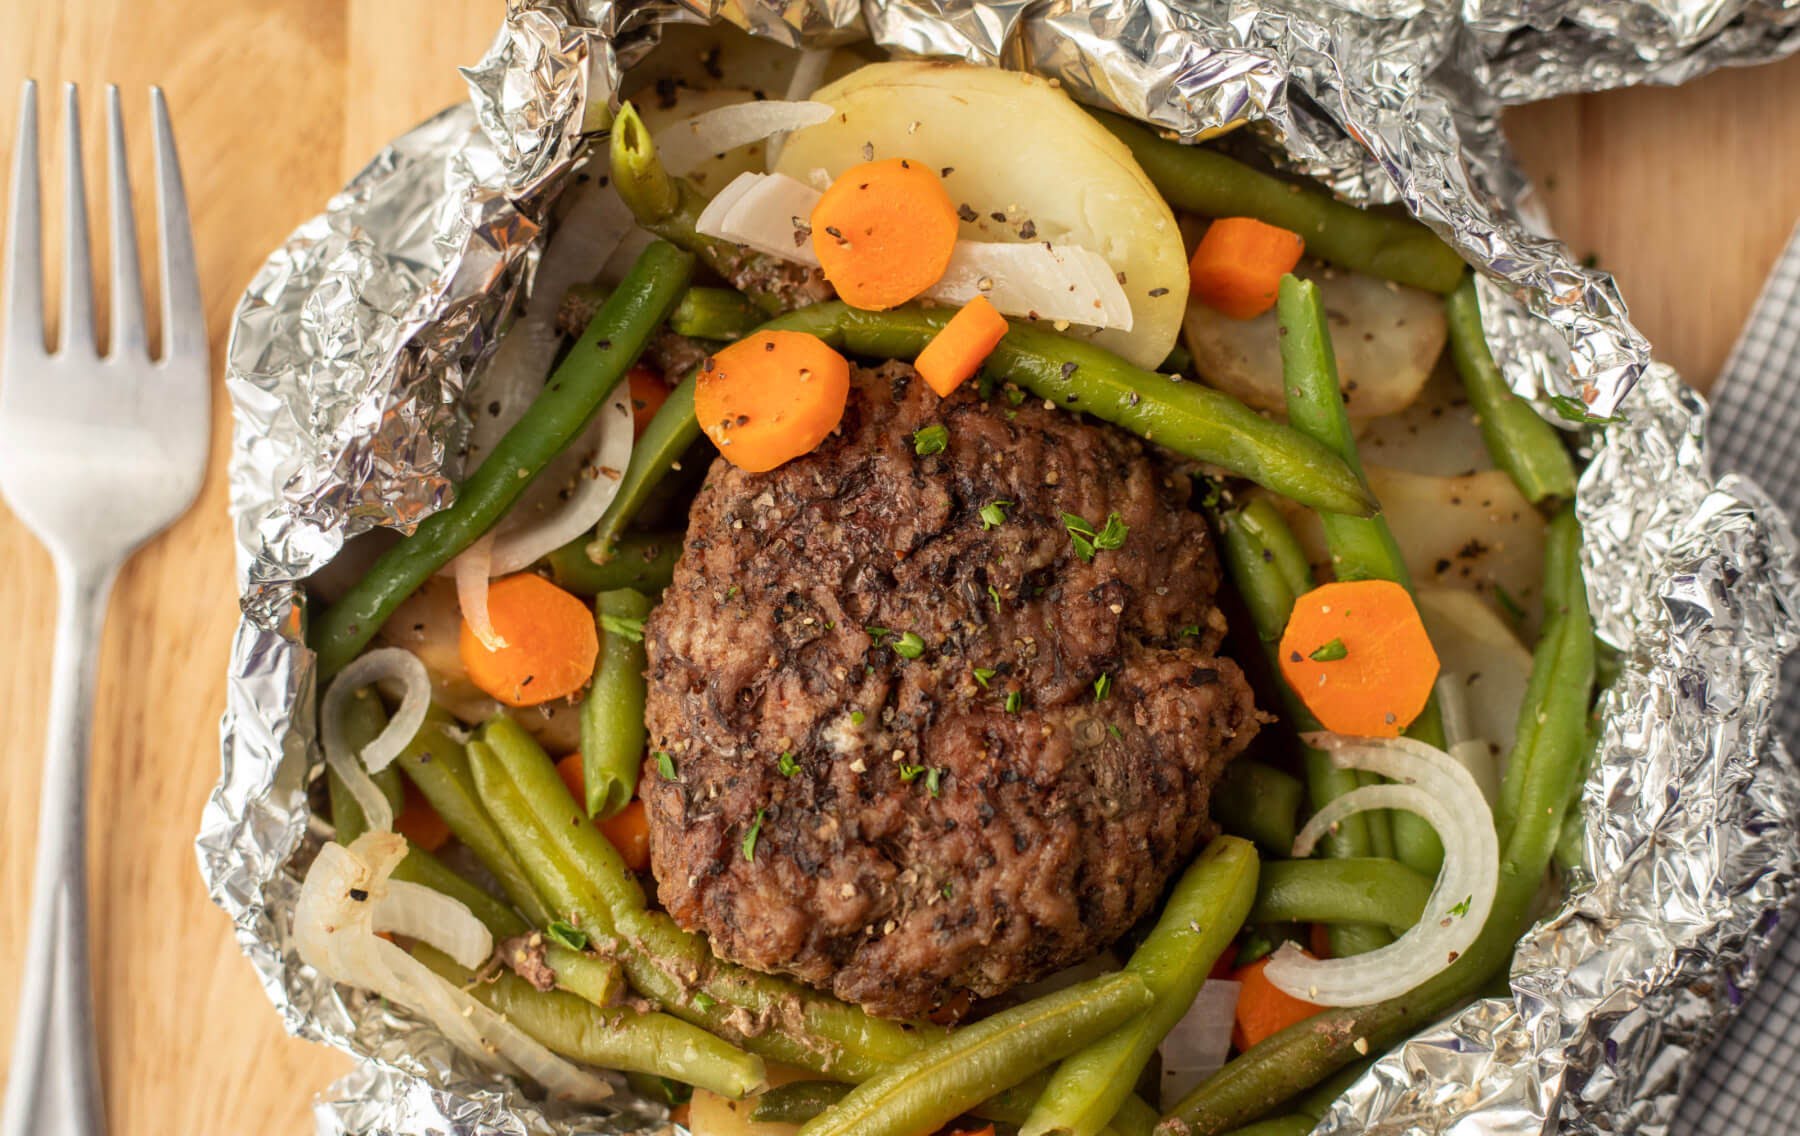 How To Cook Foil Packets Using An Electric Skillet